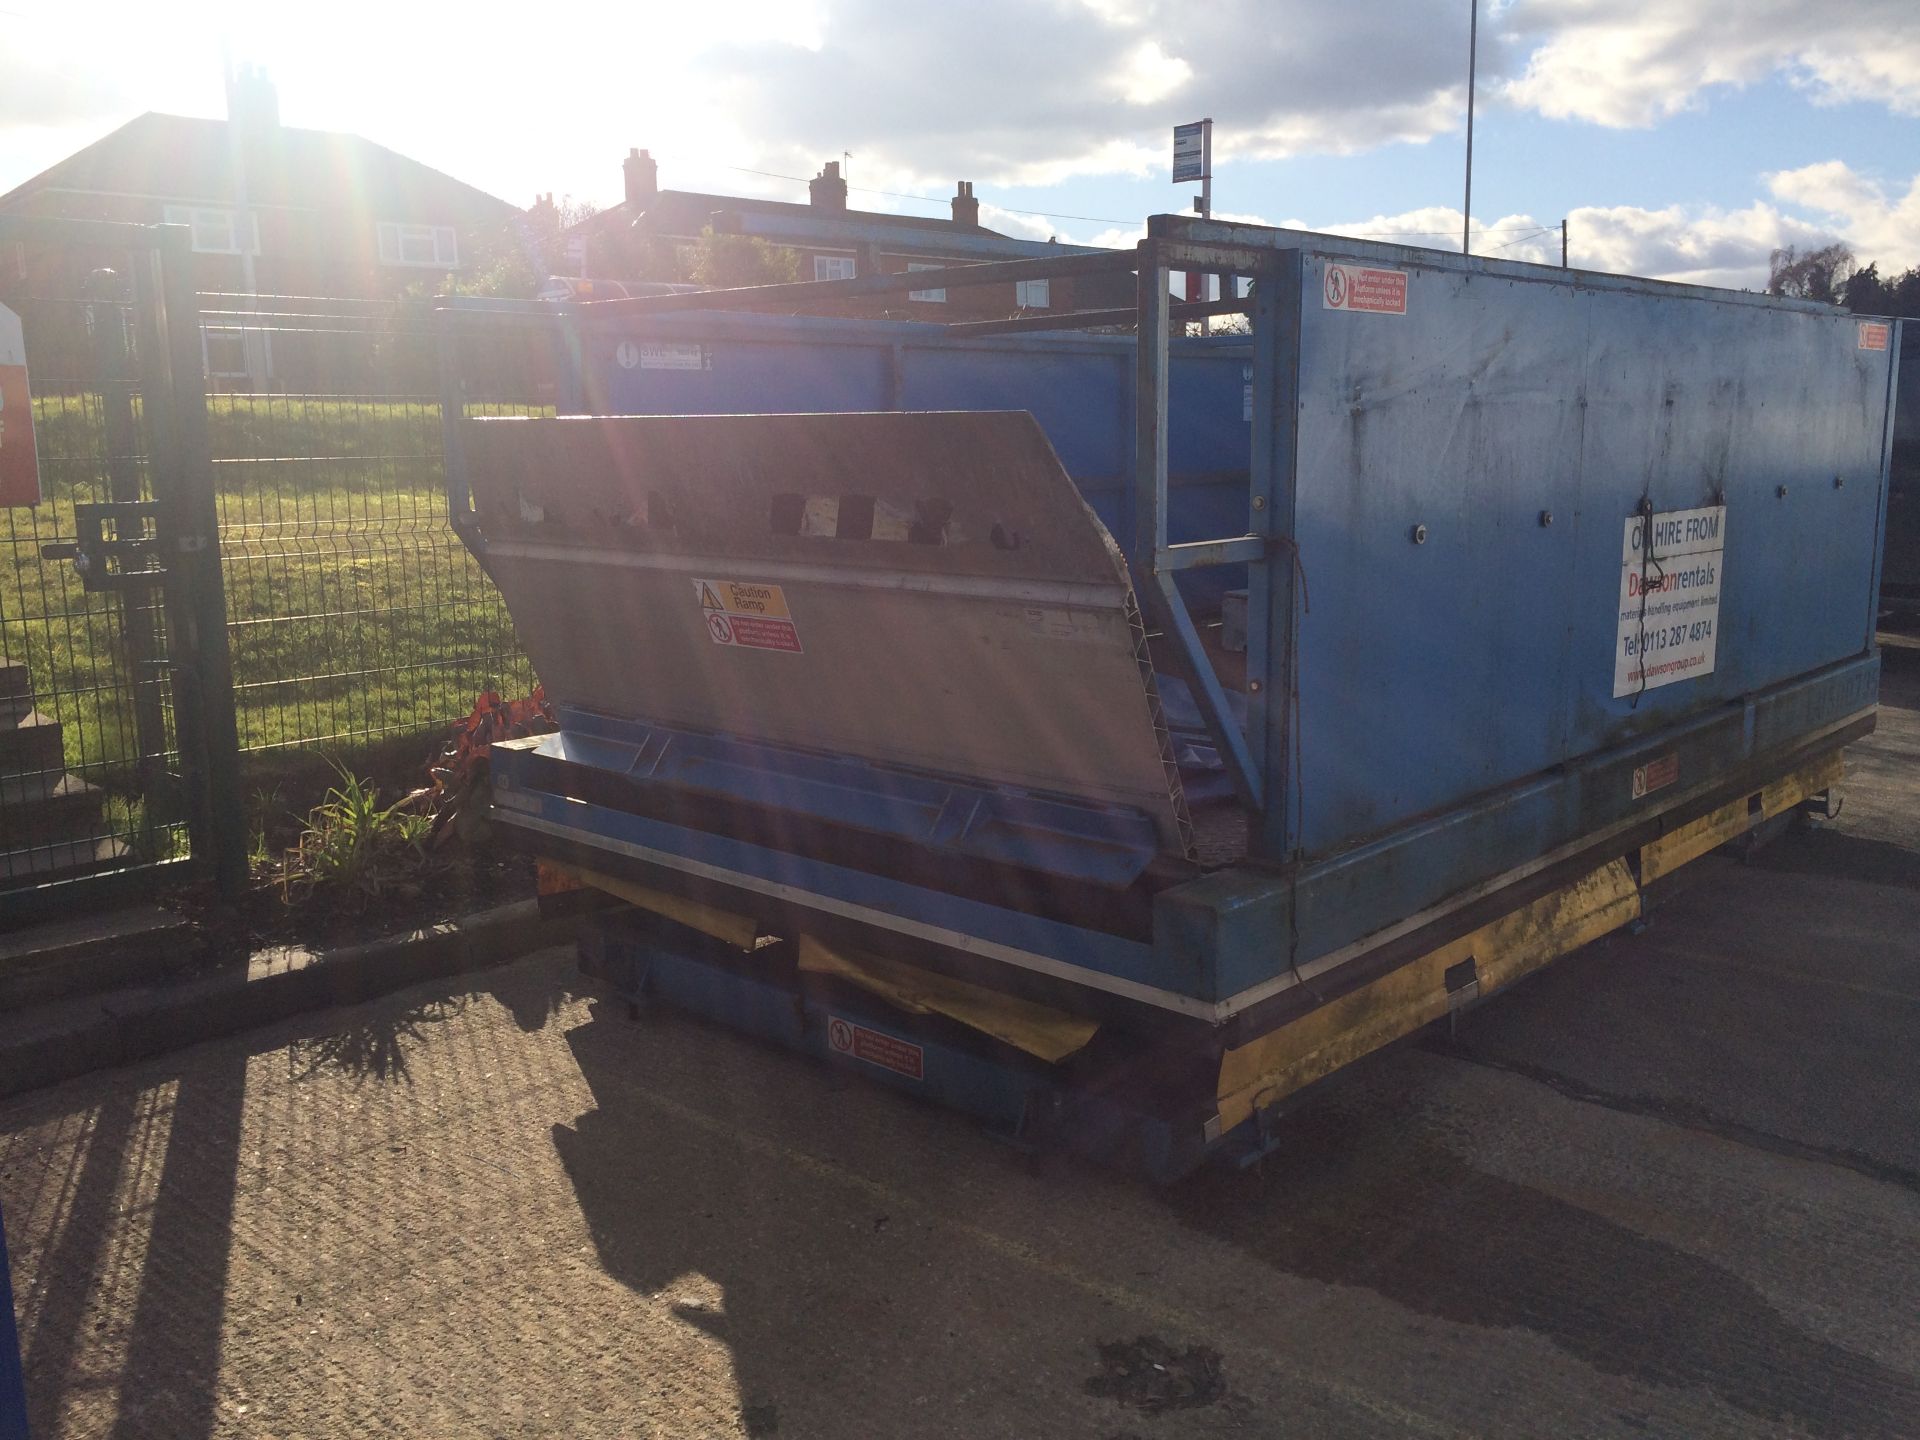 DOUBLE DECK TRAILER SCISSOR LIFT TABLE - UK LIFT - Ideal for loading double deck trailers with rolle